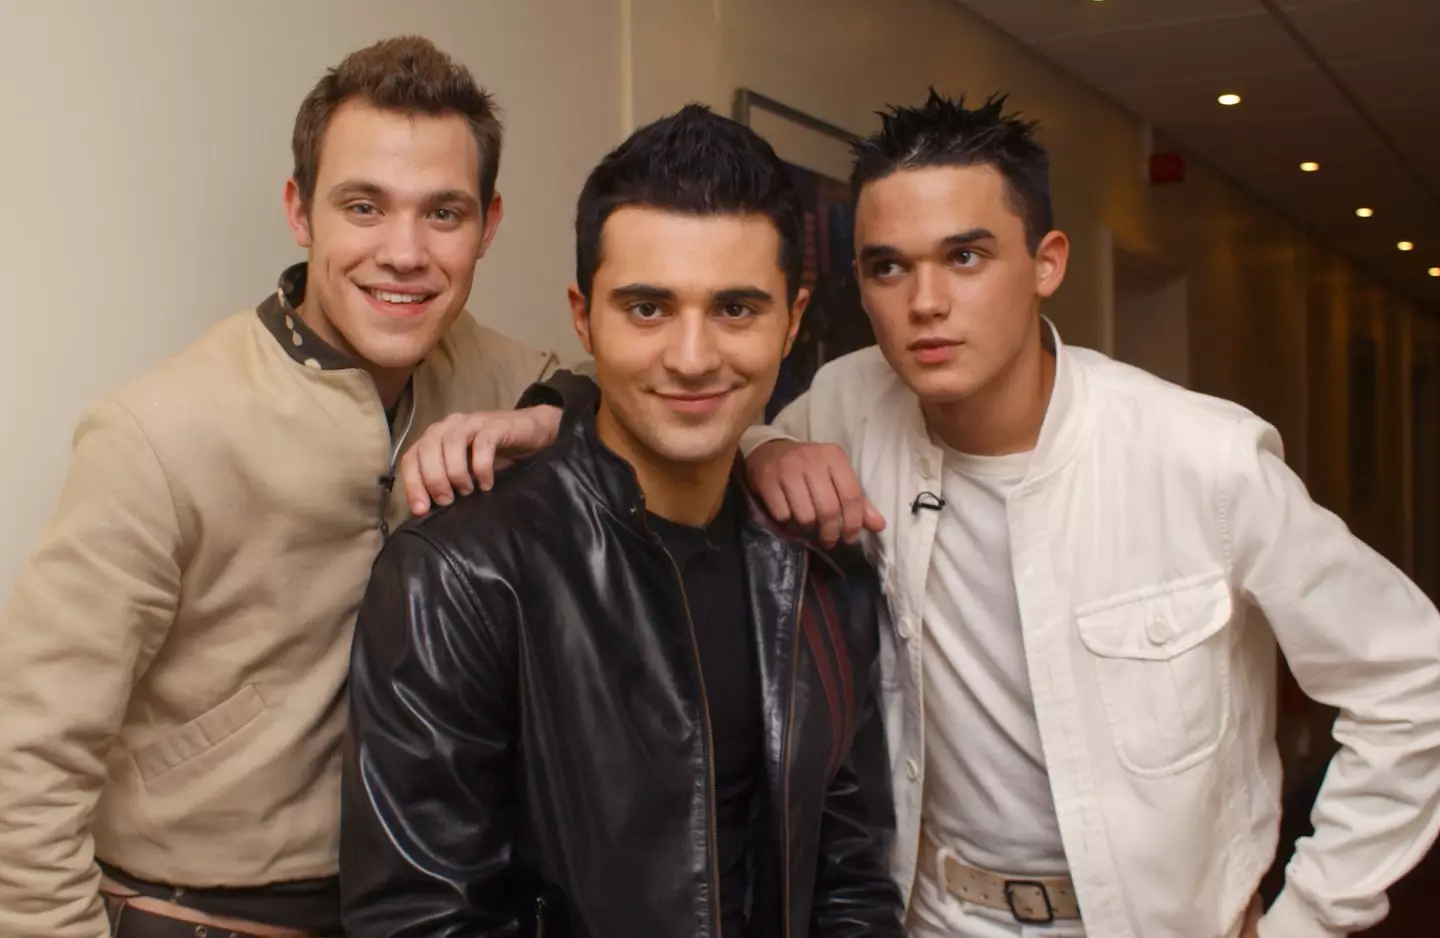 Darius appeared on Pop Idol alongside Gareth Gates and Will Young.